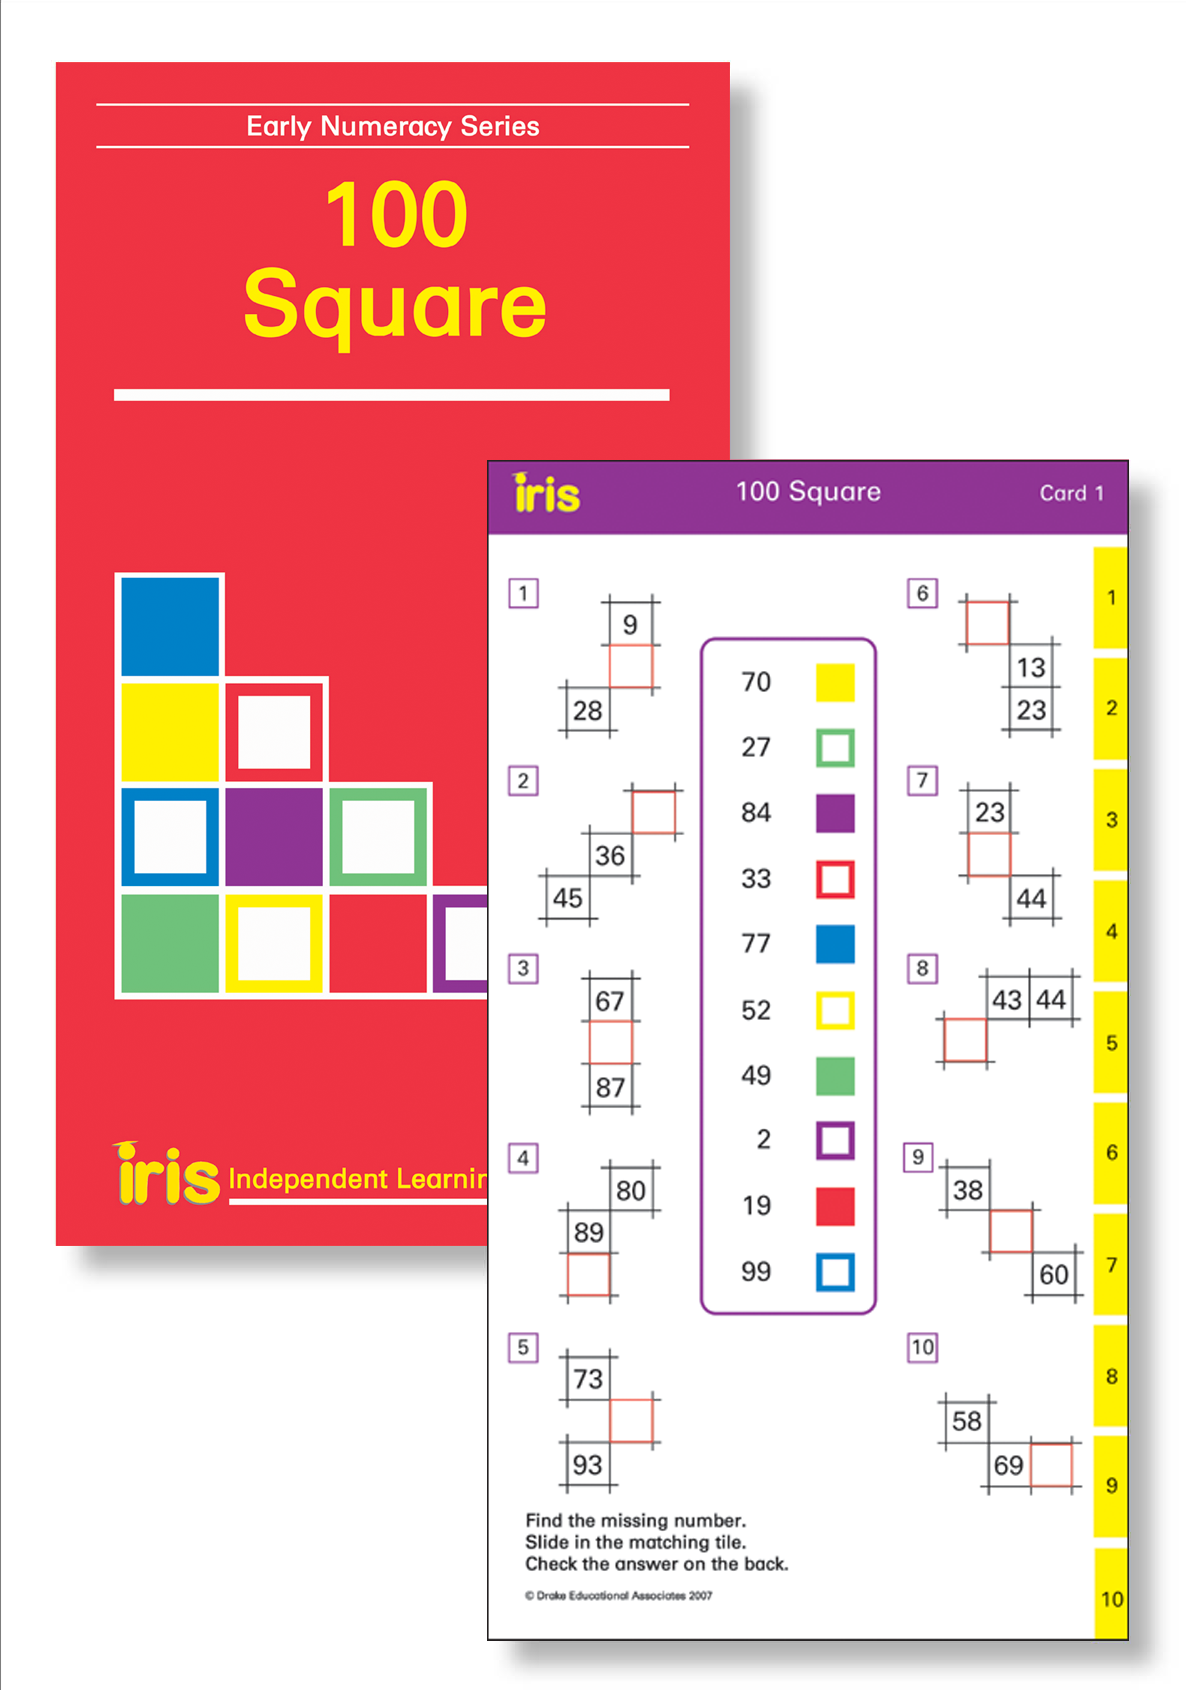 Iris Study Cards: Early Numeracy Year 2 - 100 Square